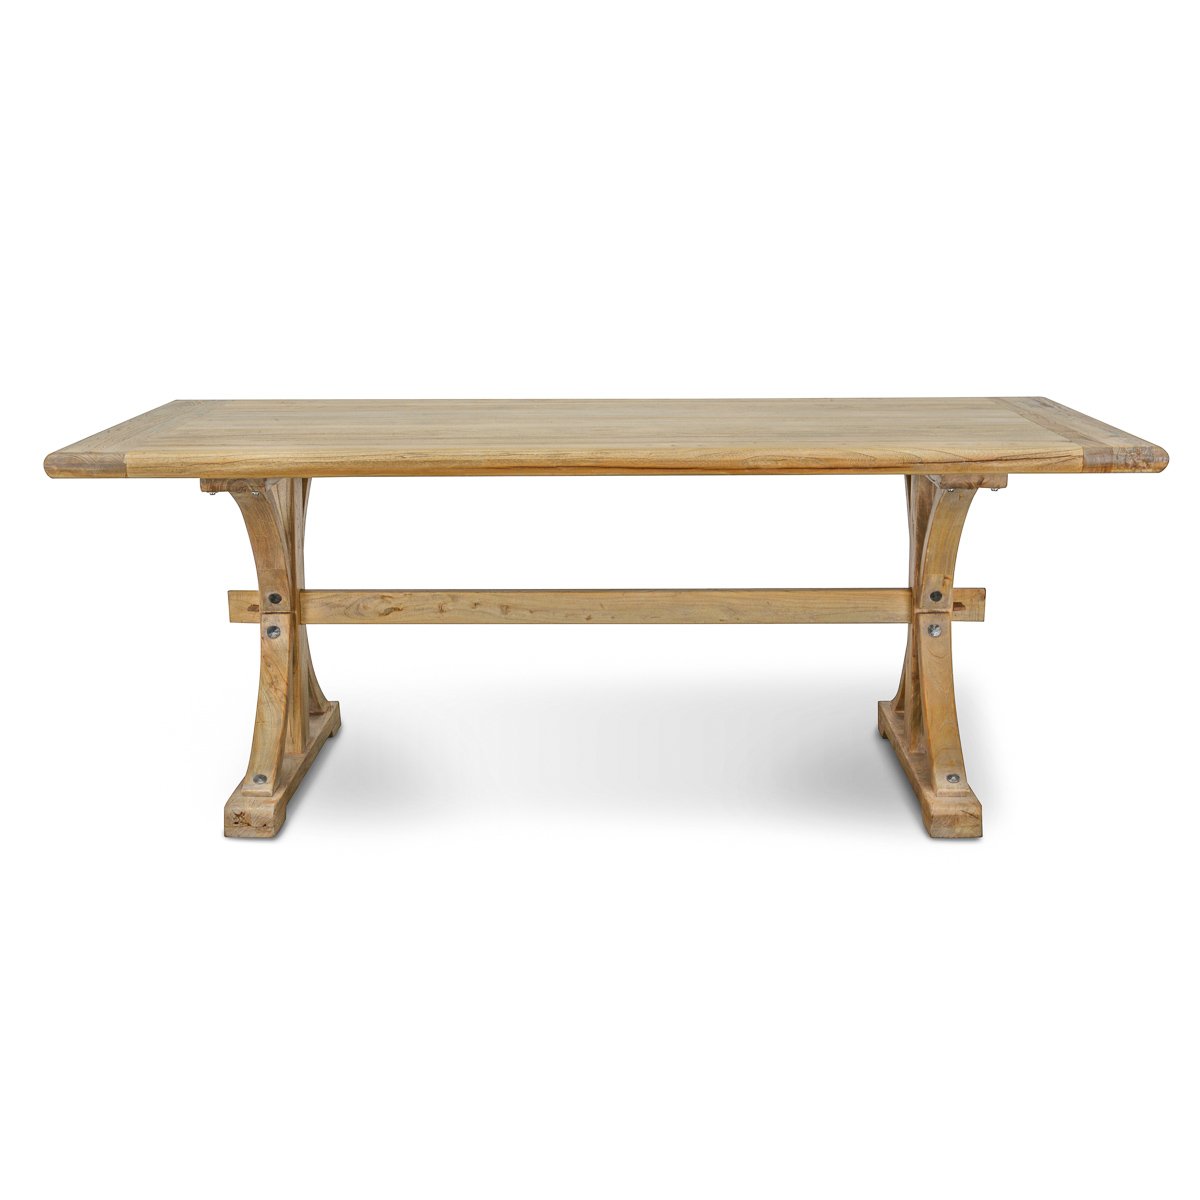 Alba Reclaimed Elm Wood Dining Table 2M - Natural - Dining Tables